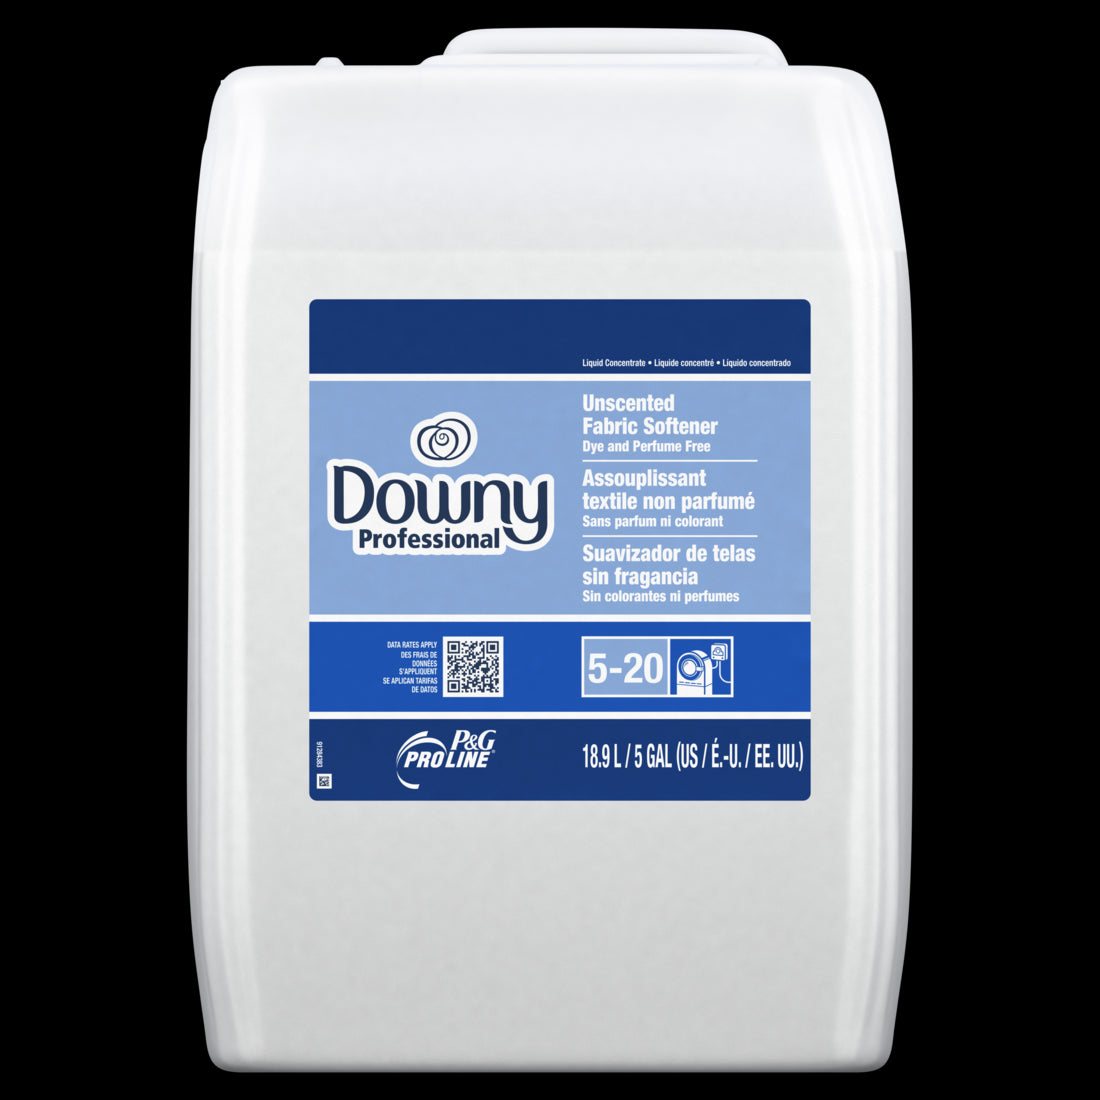 P&G ProLine Downy Professional Fabric Softener Unscented Closed Loop 5 Gallon - 18.9L/1pk